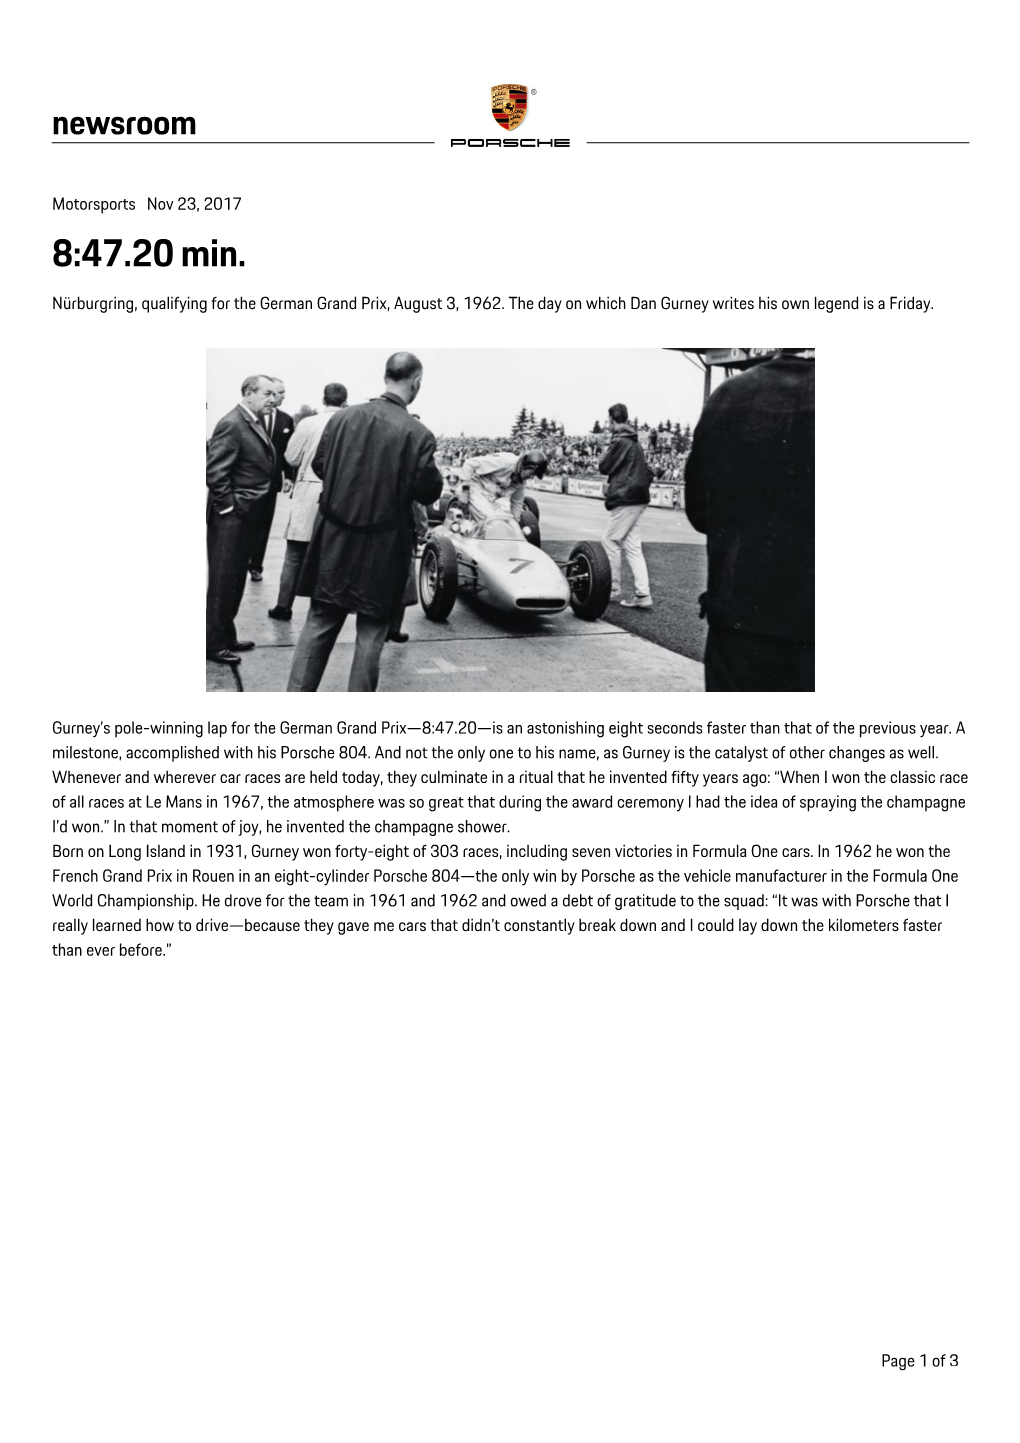 8:47.20 Min. Nürburgring, Qualifying for the German Grand Prix, August 3, 1962